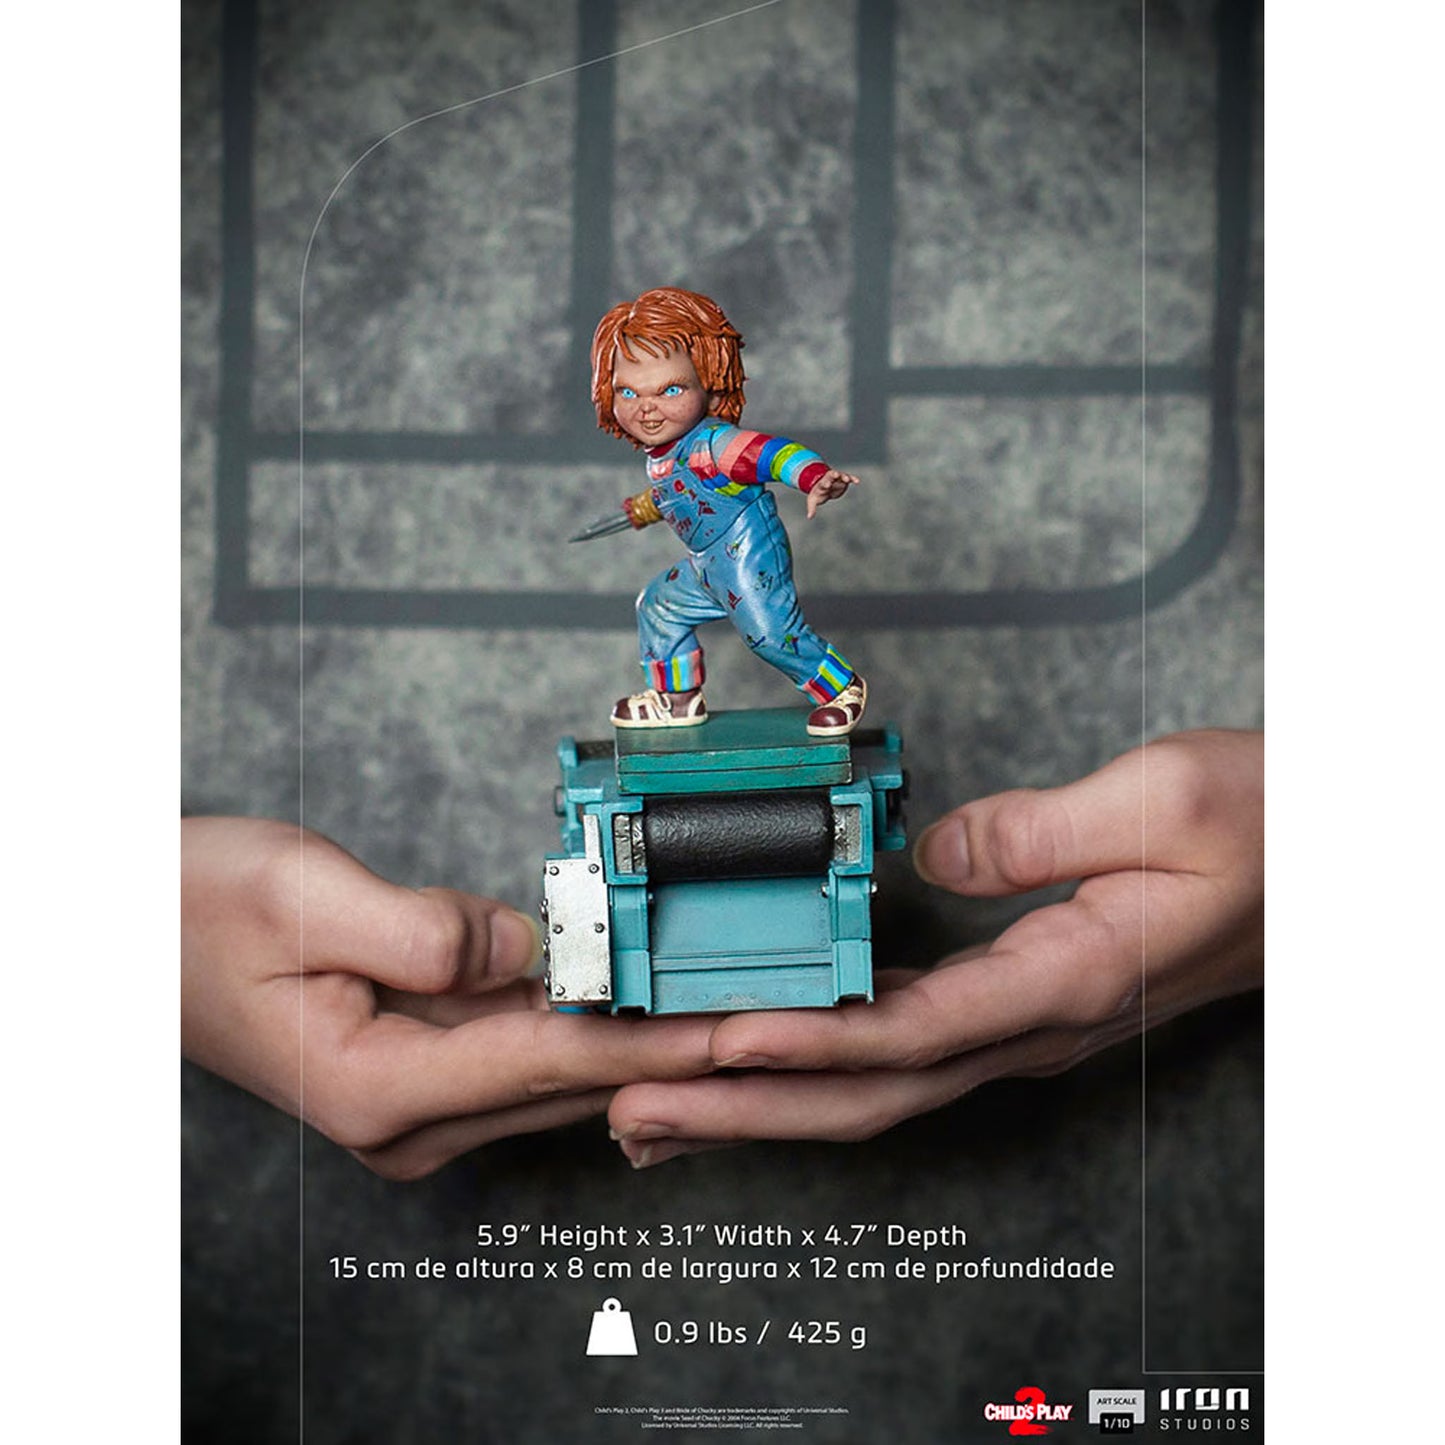 Chucky (Child's Play 2) 1:10 Art Scale Statue